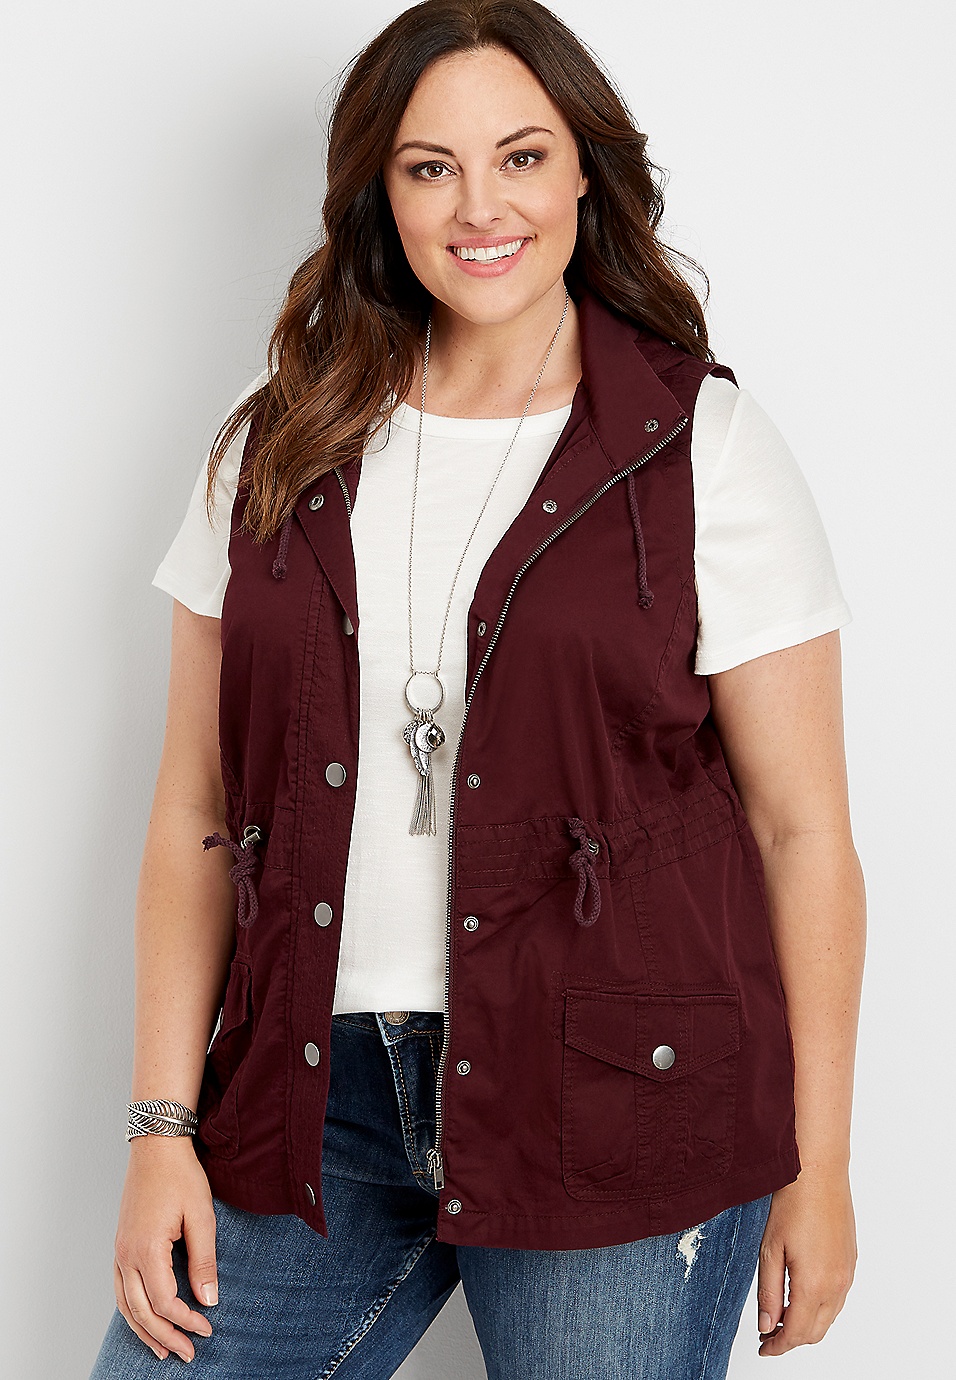 maurices Womens Plus Size Knit Lined Hooded Vest 